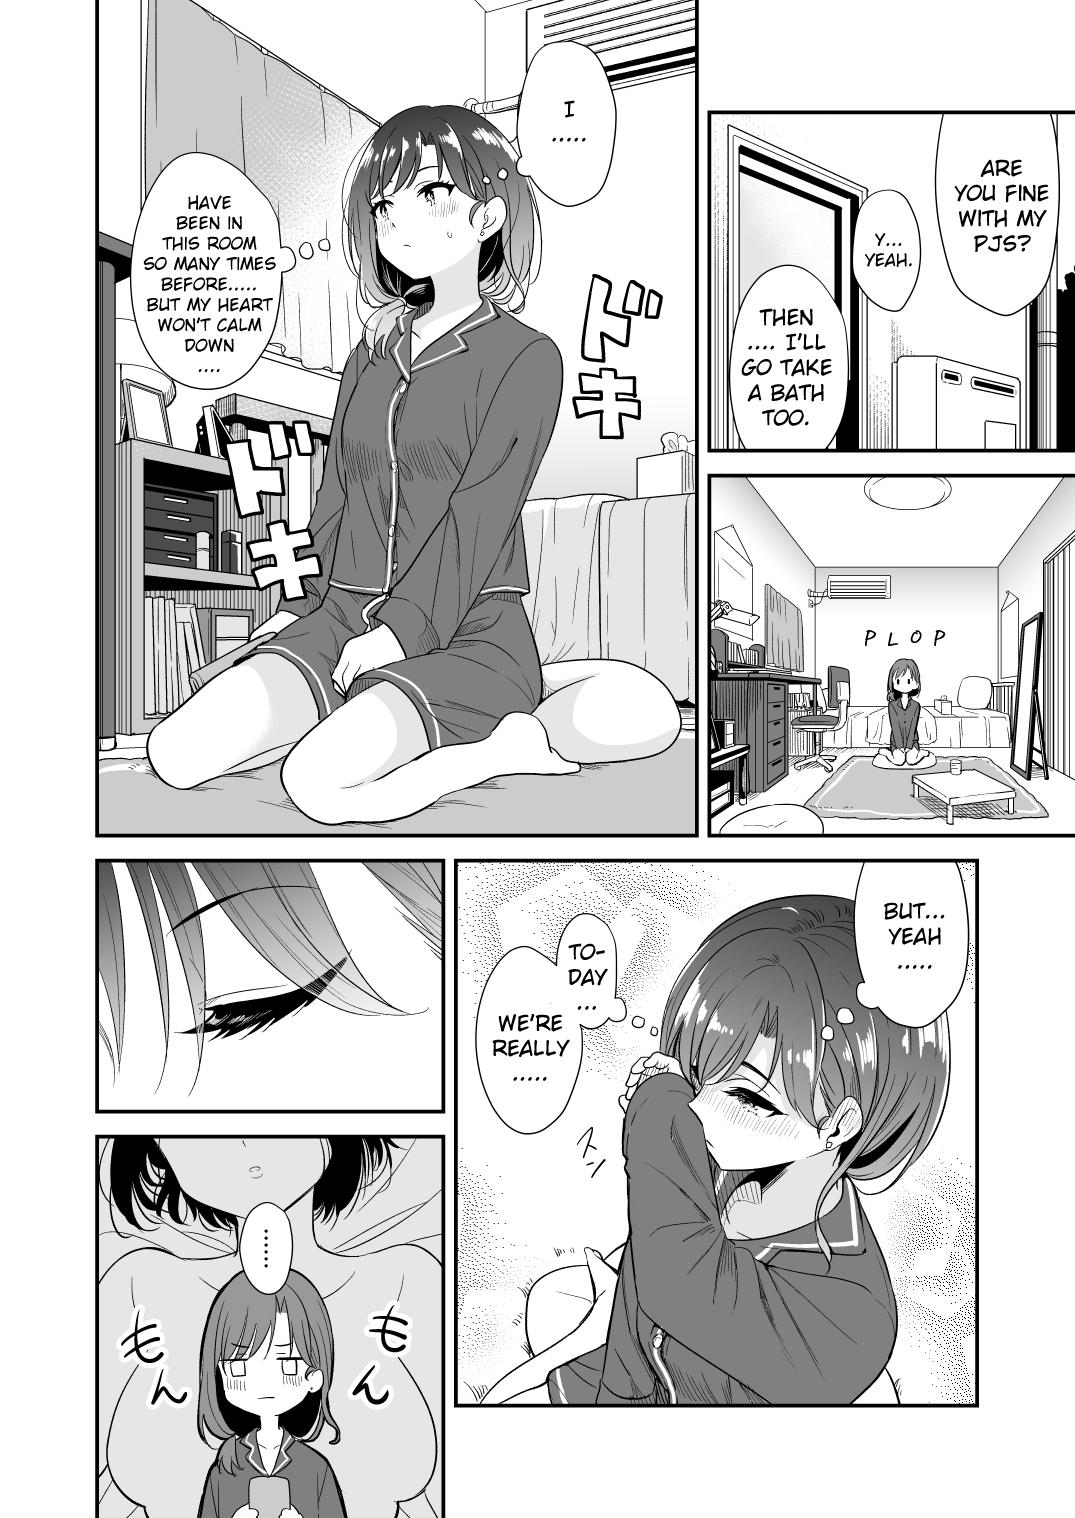 Sexcams Kyou Oya, Inai kara | My Parents Aren't Home Today, So... Rough Sex - Page 8